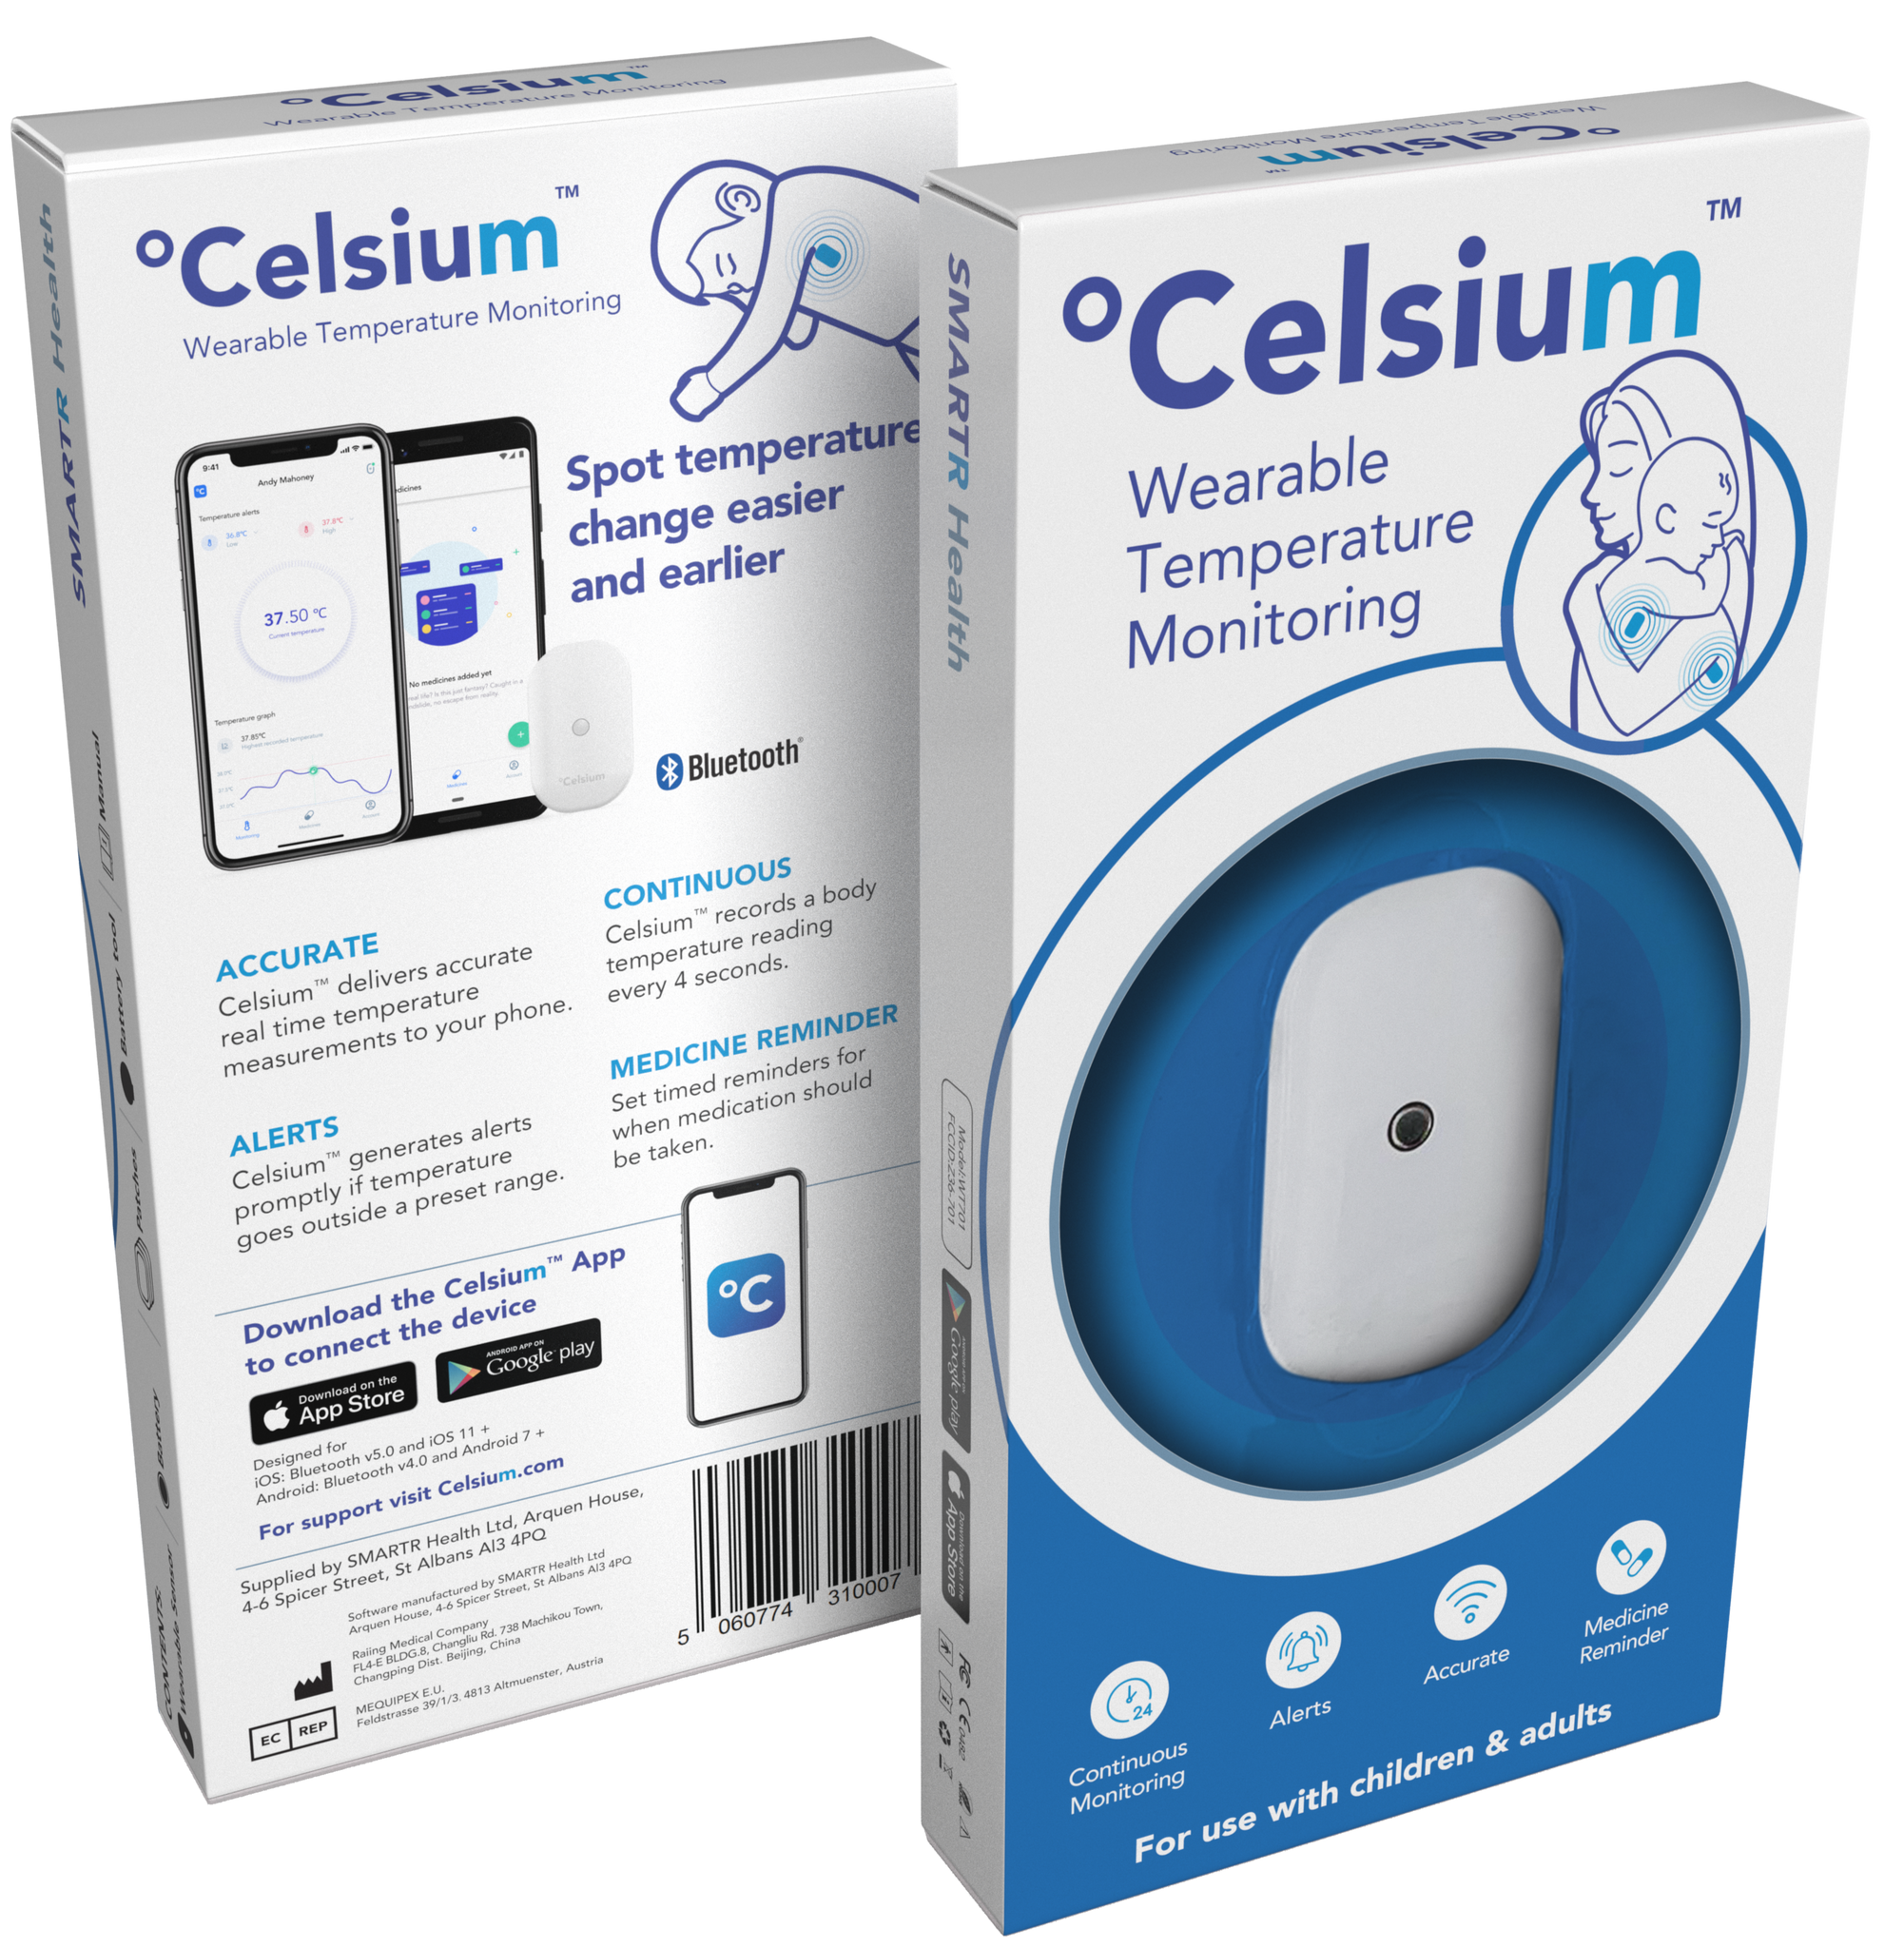 Celsium launches most accurate wearable thermometer - Med-Tech Innovation